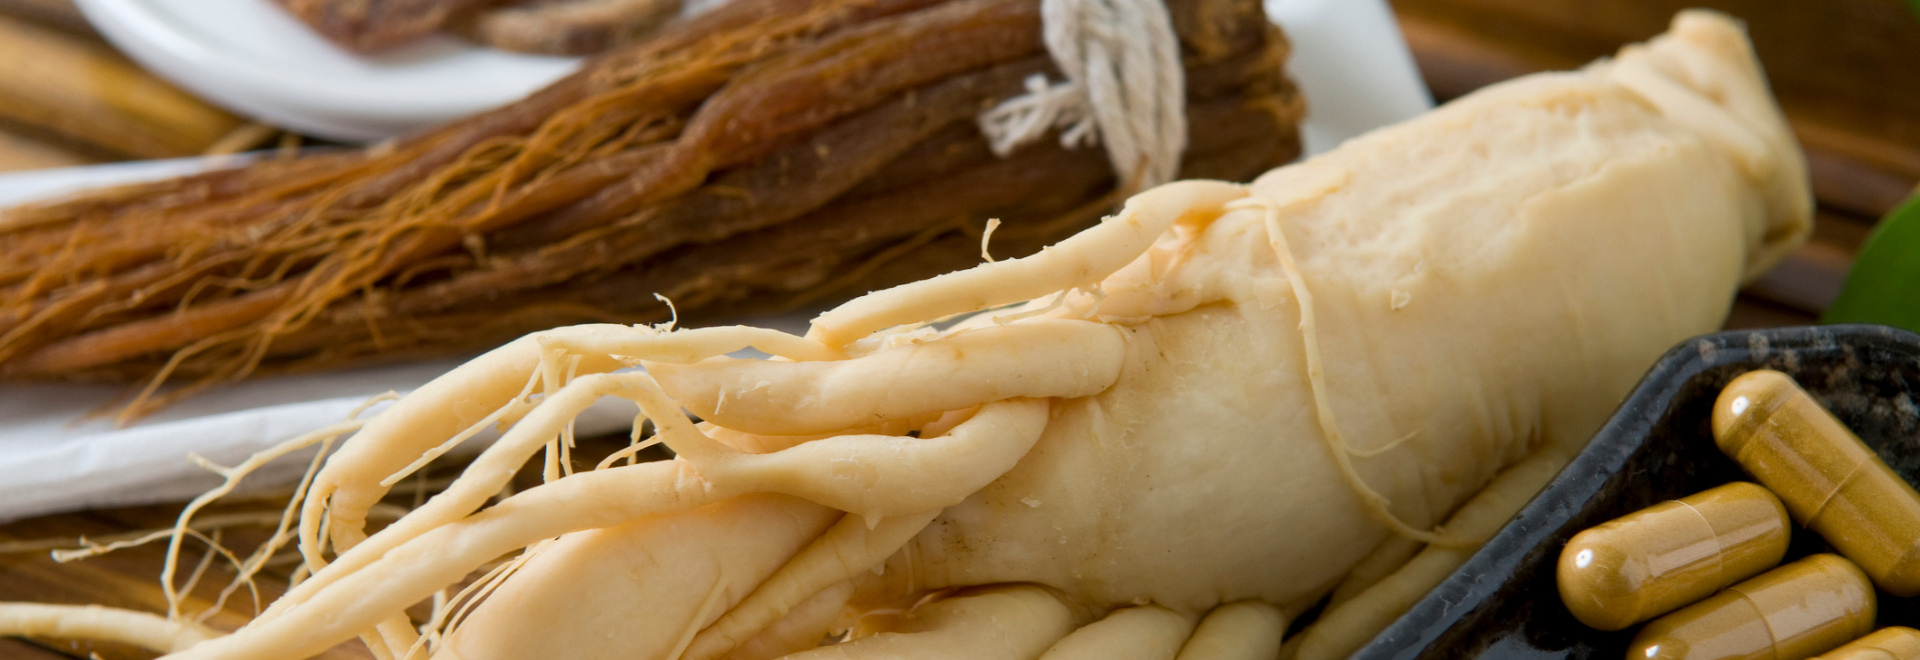 health-benefits-and-side-effects-of-ginseng